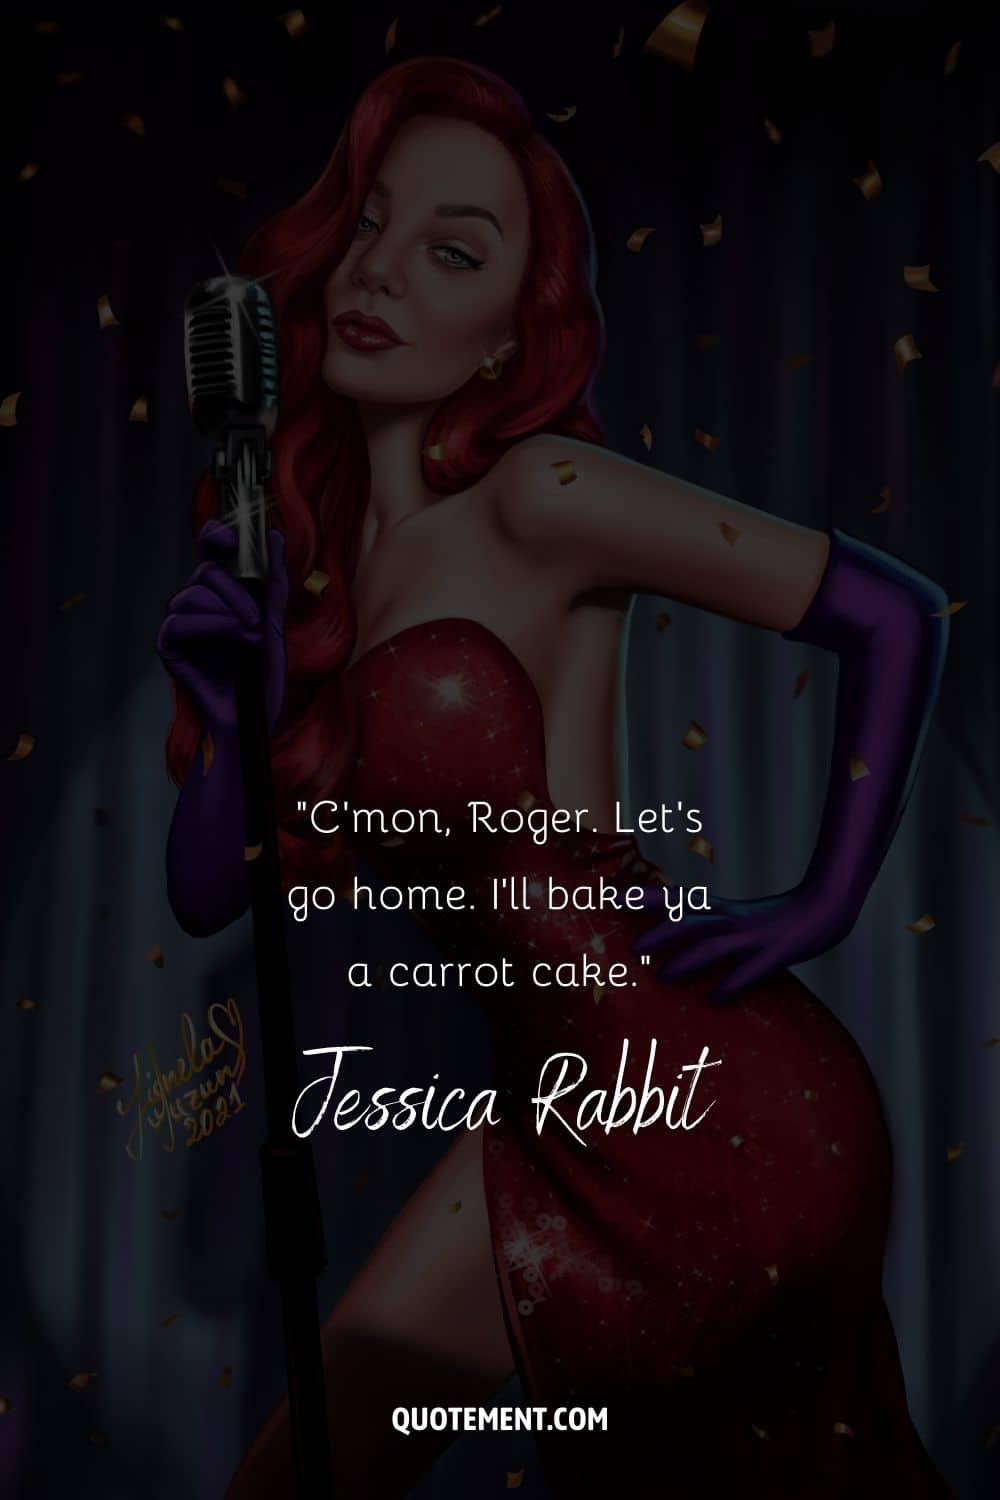 Jessica Rabbit image representing her quote about carrot cake
